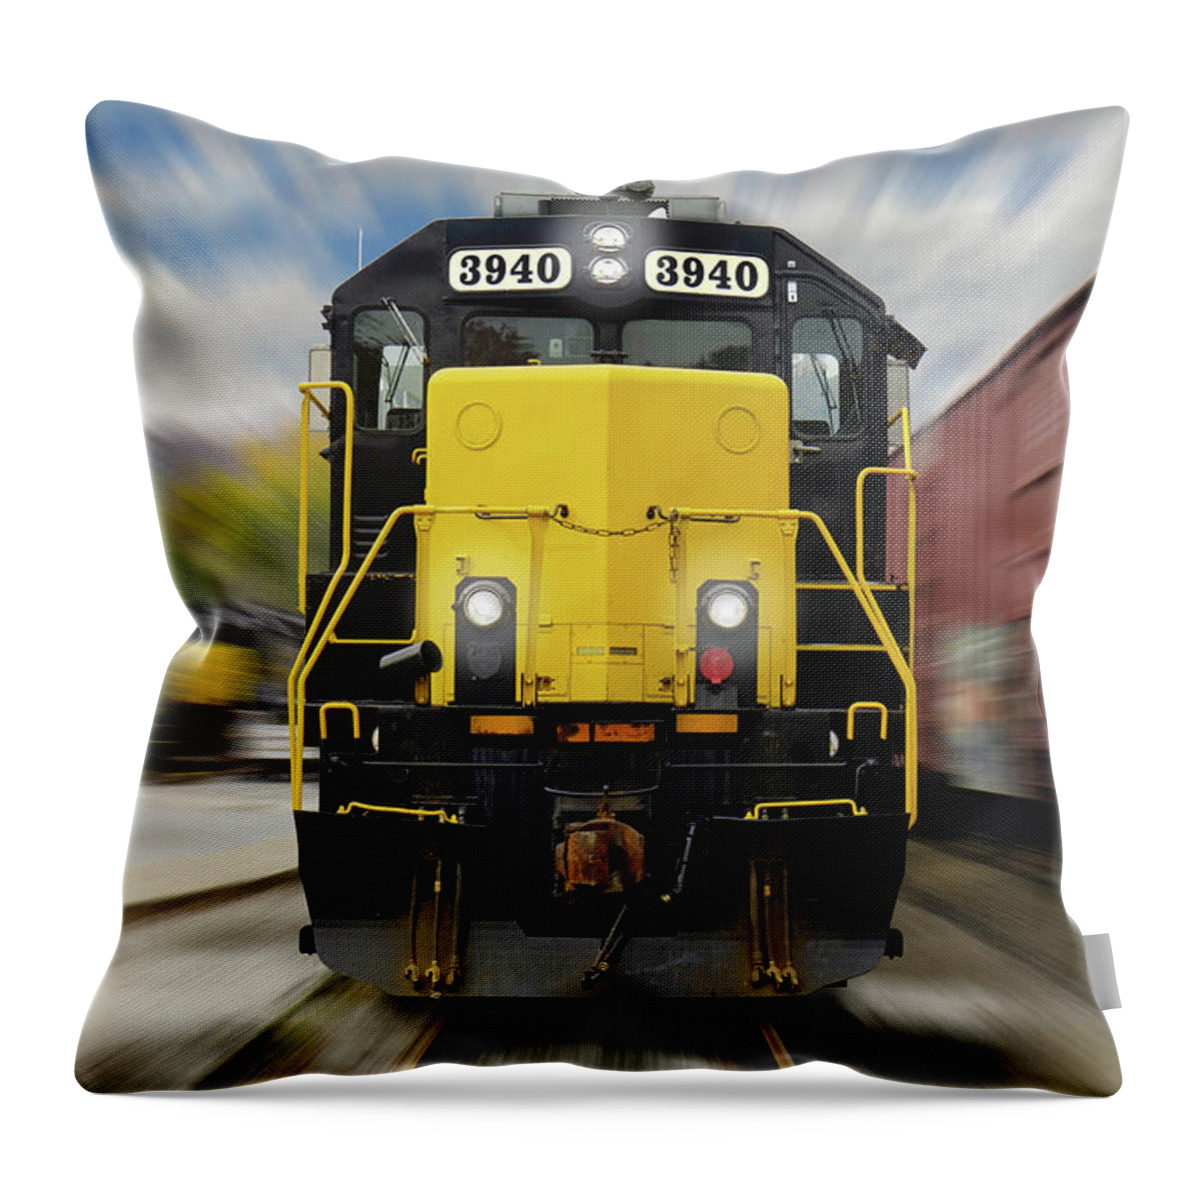 Railroad Throw Pillow featuring the photograph Blue Rridge Southern 3940 On The Move by Mike McGlothlen